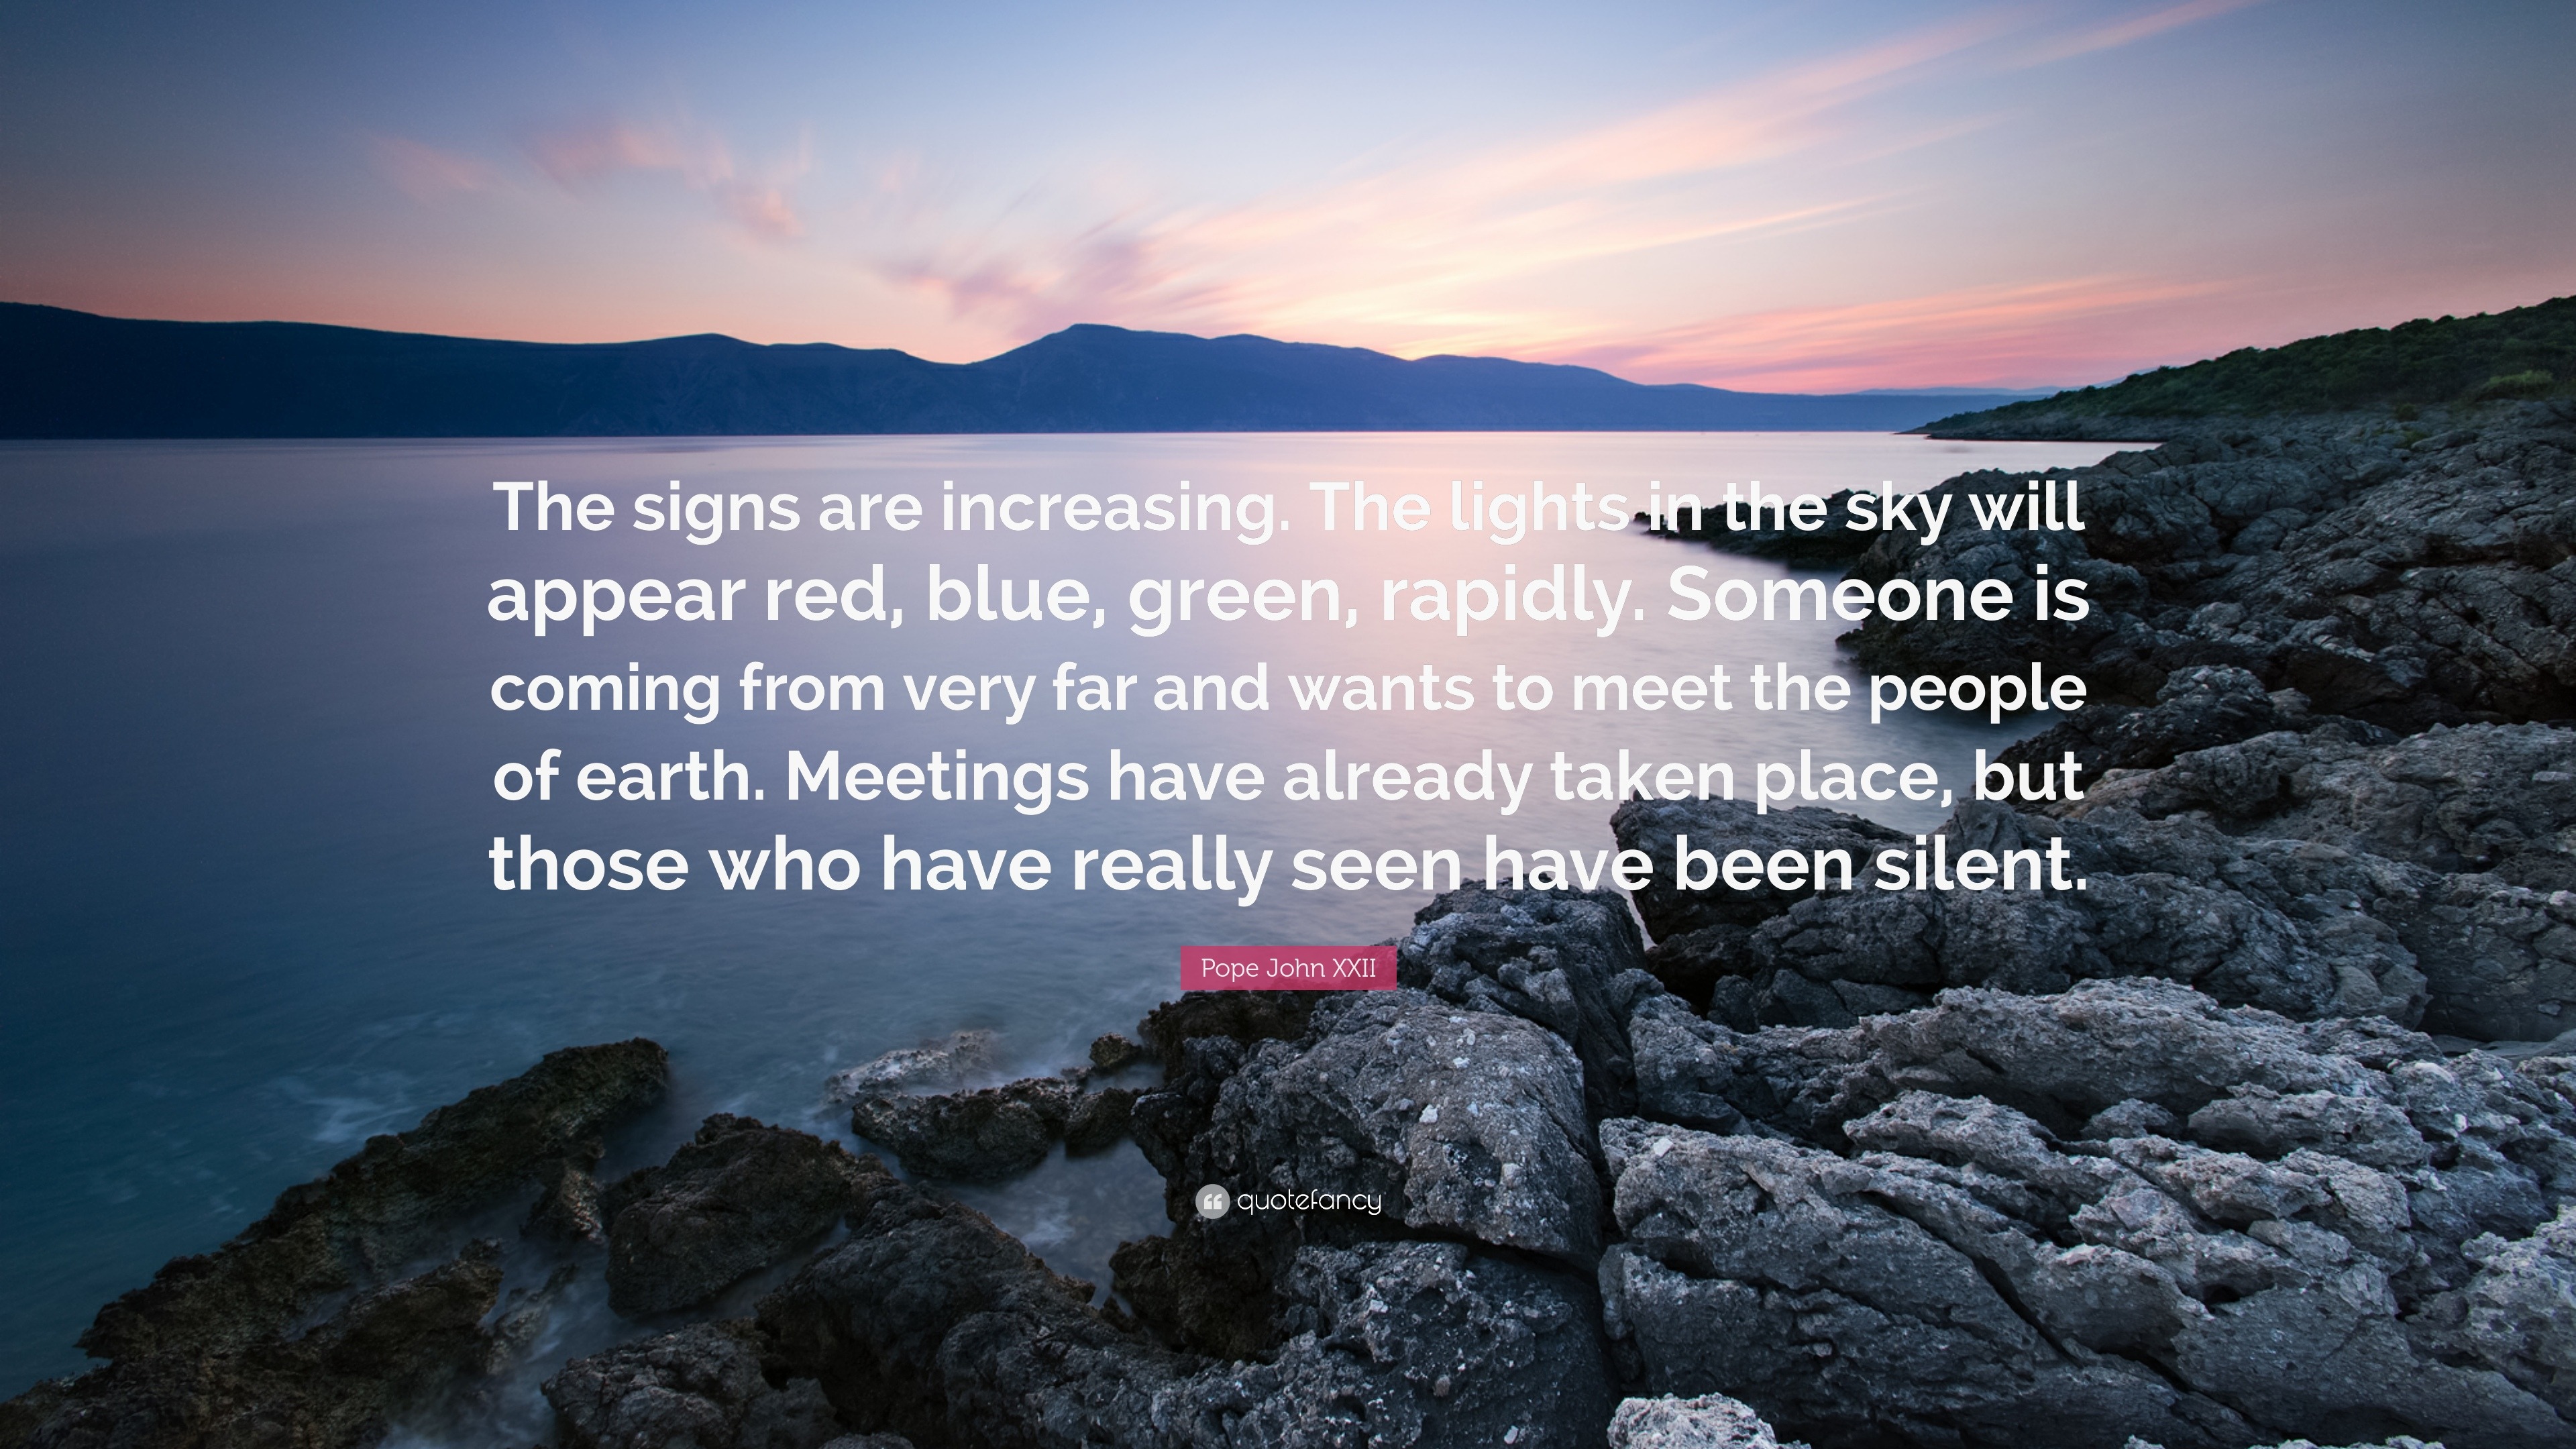 Pope John XXII Quote: signs are increasing. The lights in the sky will appear red, green, rapidly. Someone is coming from very far a...”